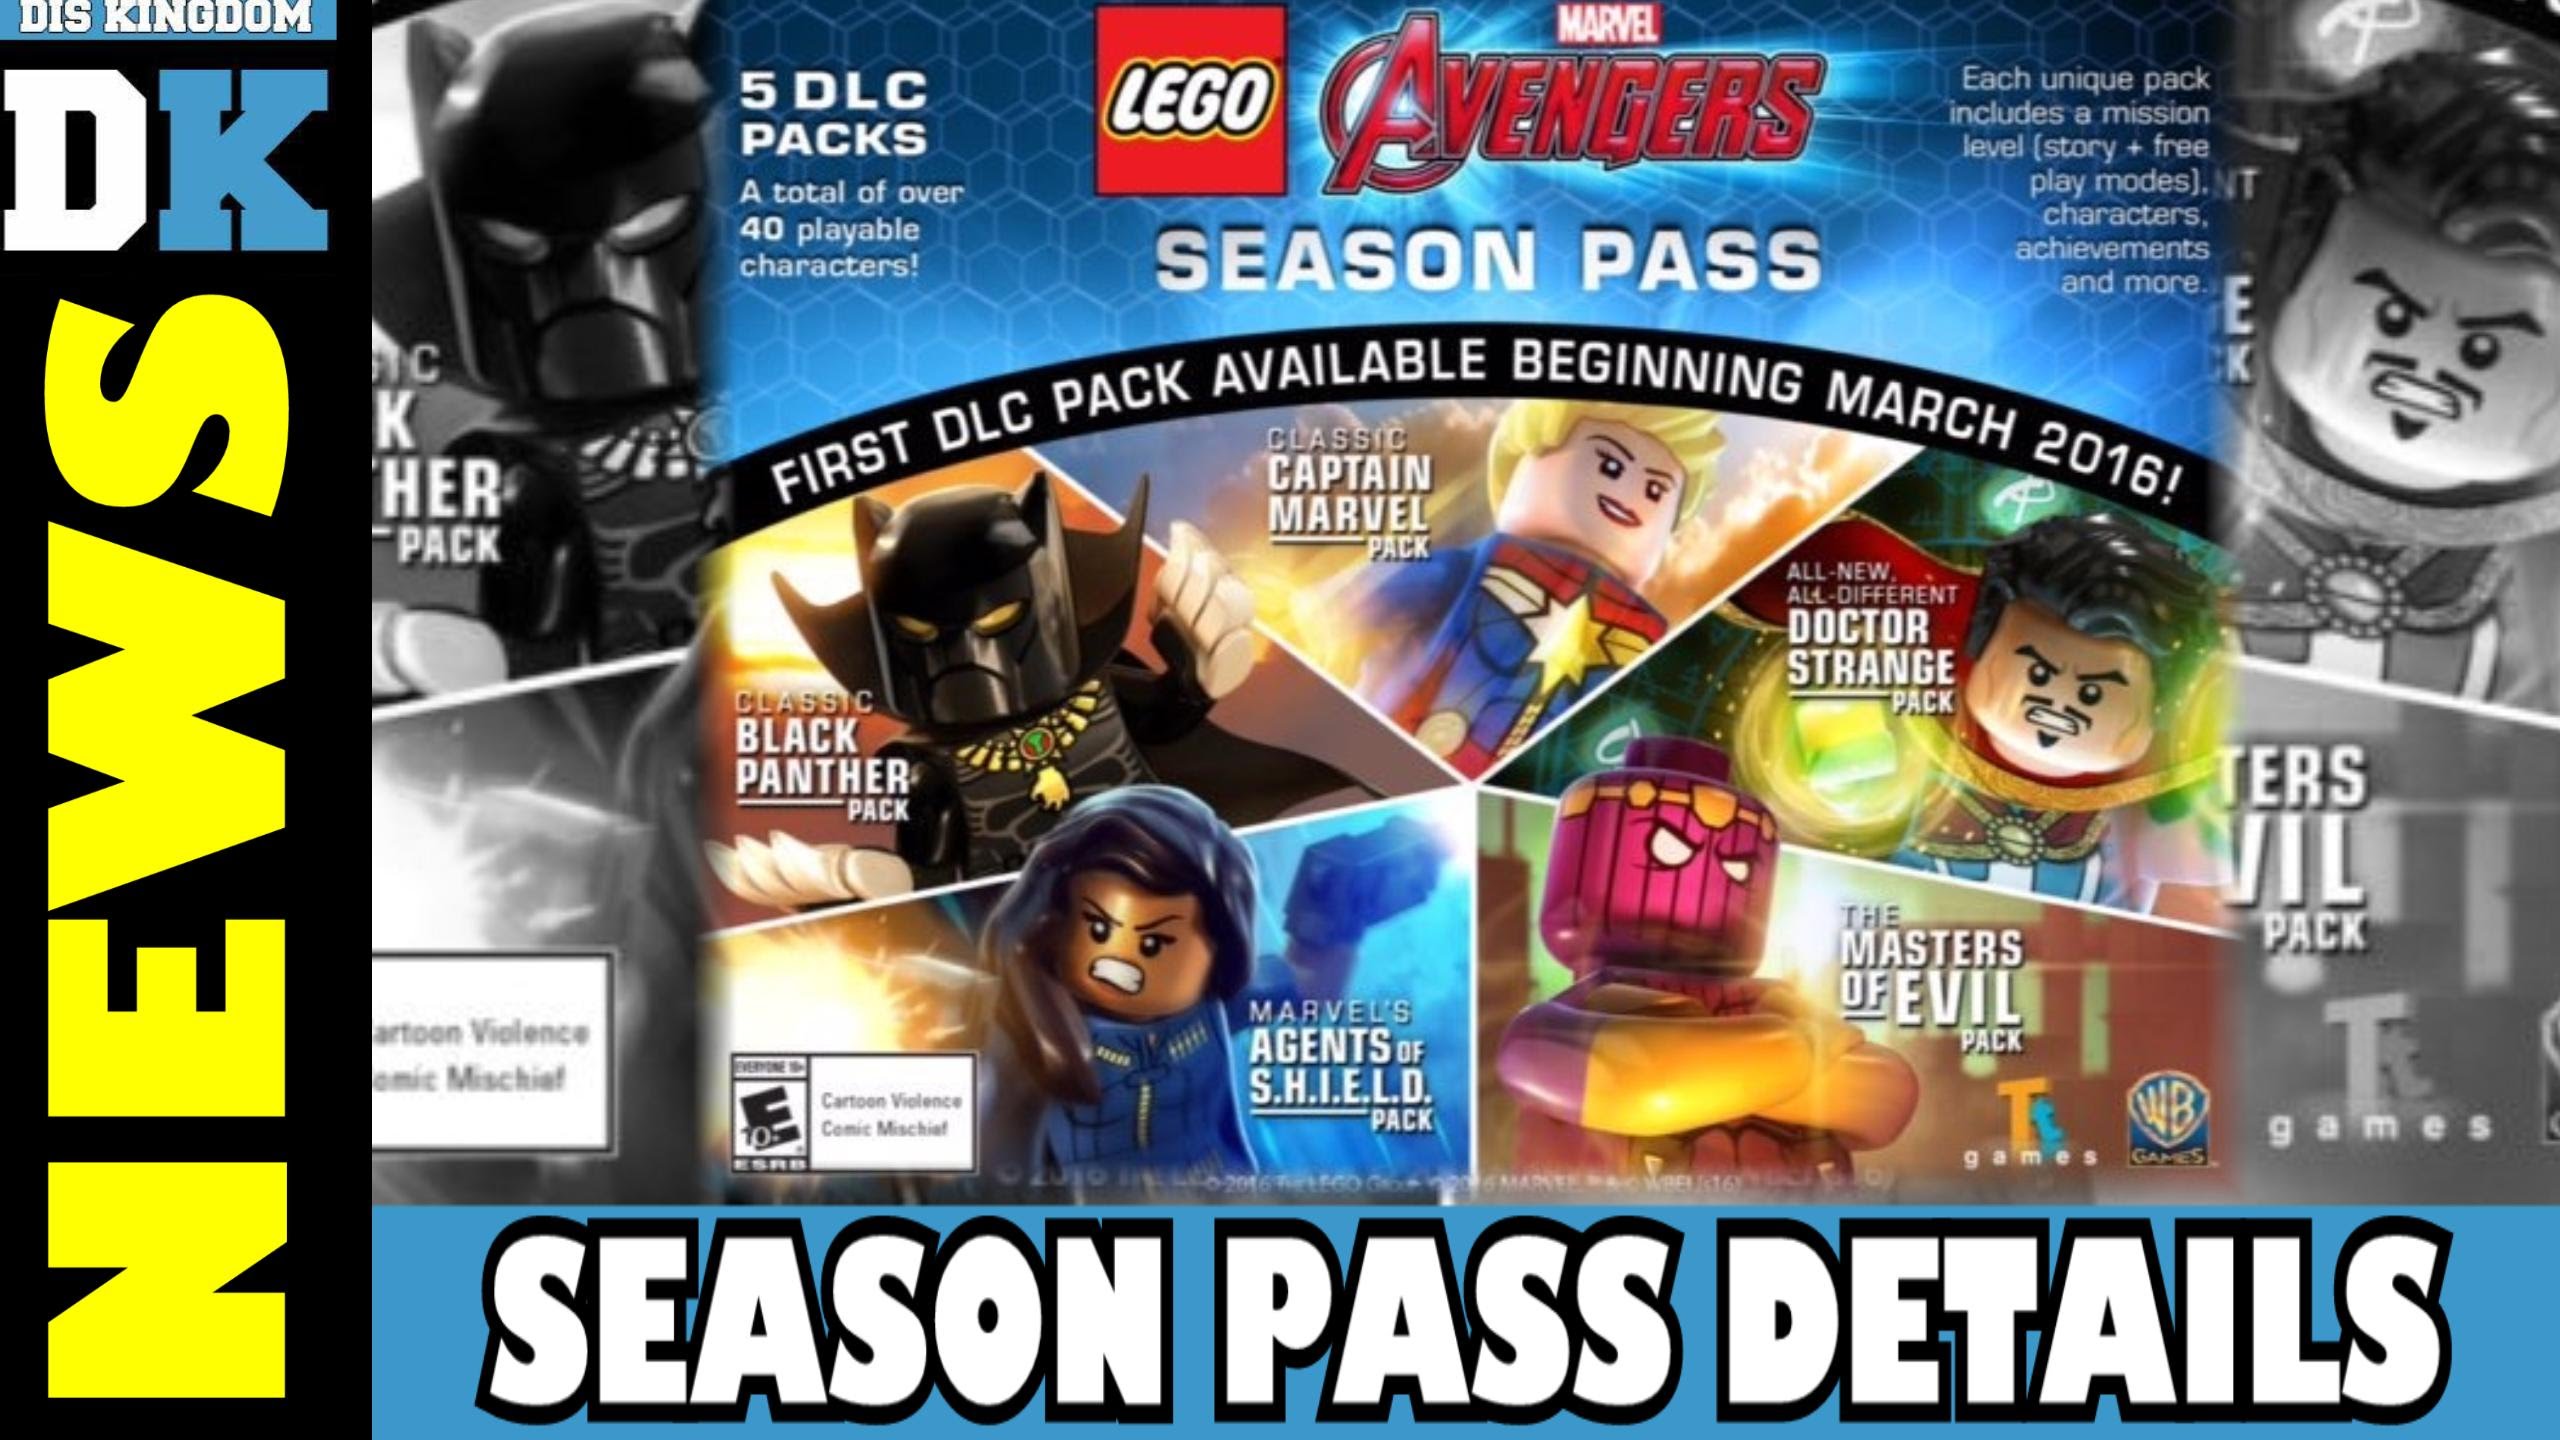 LEGO® Marvel's Avengers Classic Black Panther Pack